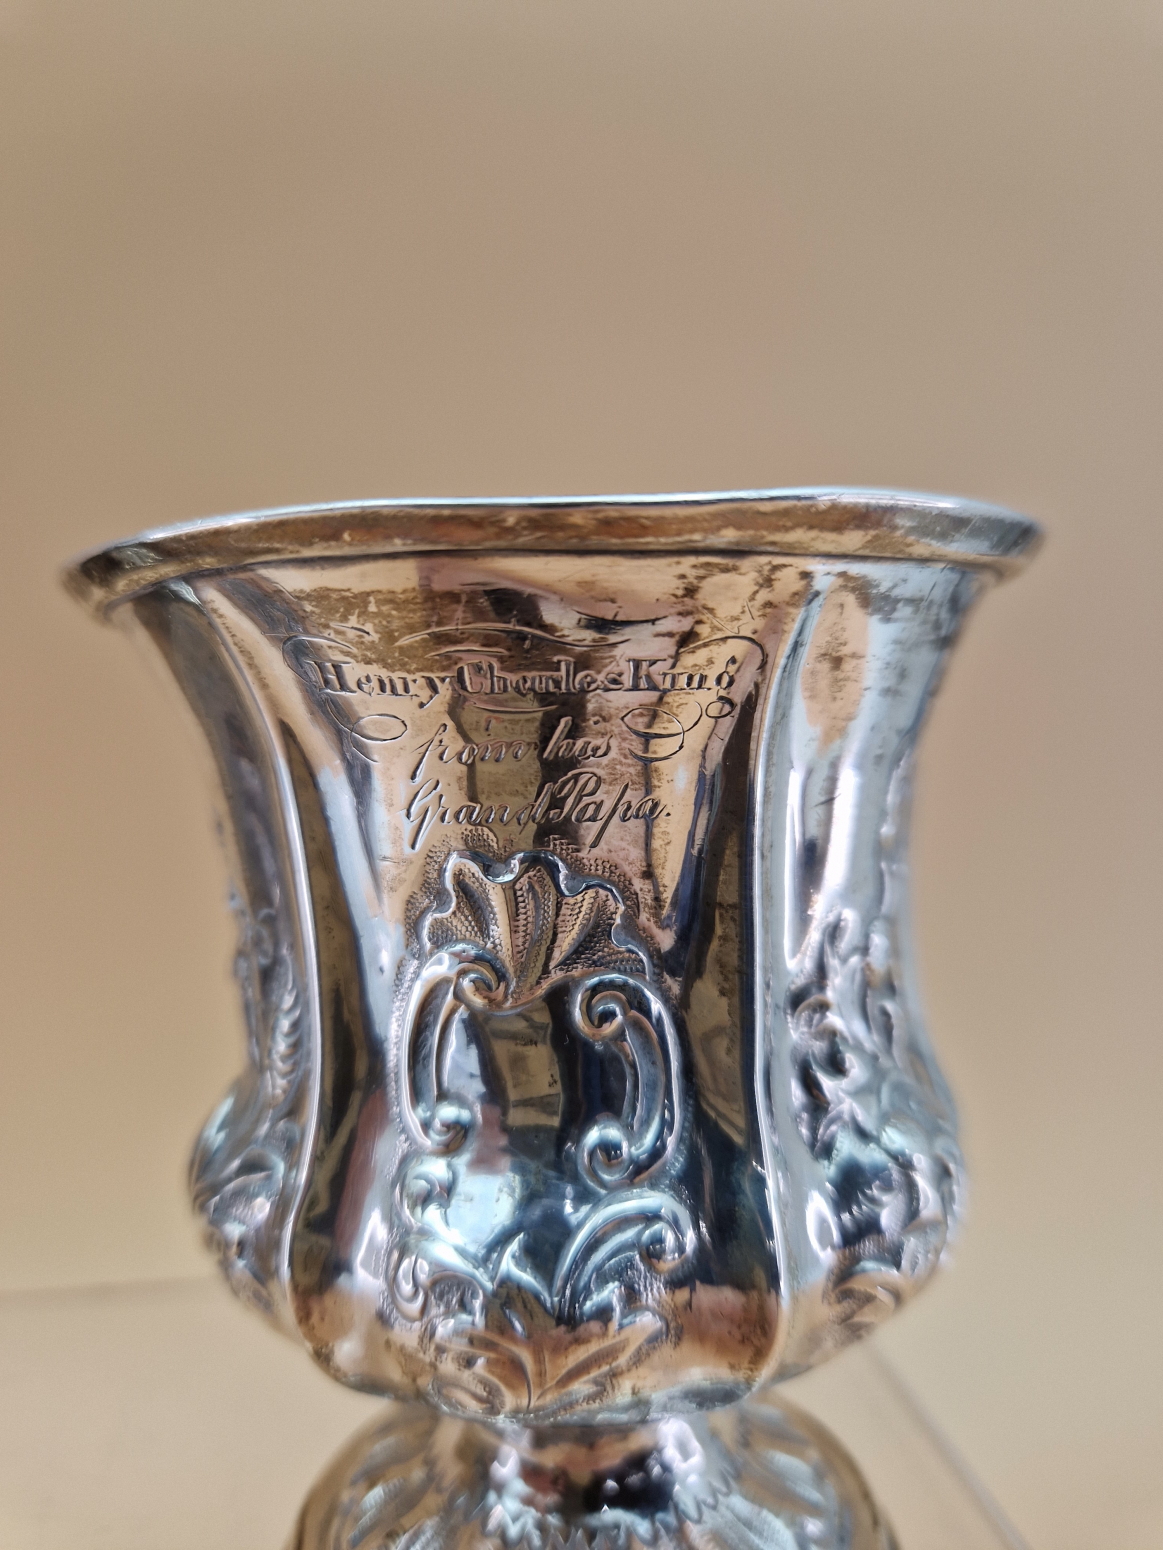 A VICTORIAN SILVER MUG BY WILLIAM HEWITT, LONDON 1838, EMBOSSED WITH FLOWERS TOGETHER WITH A QUARTER - Image 4 of 8